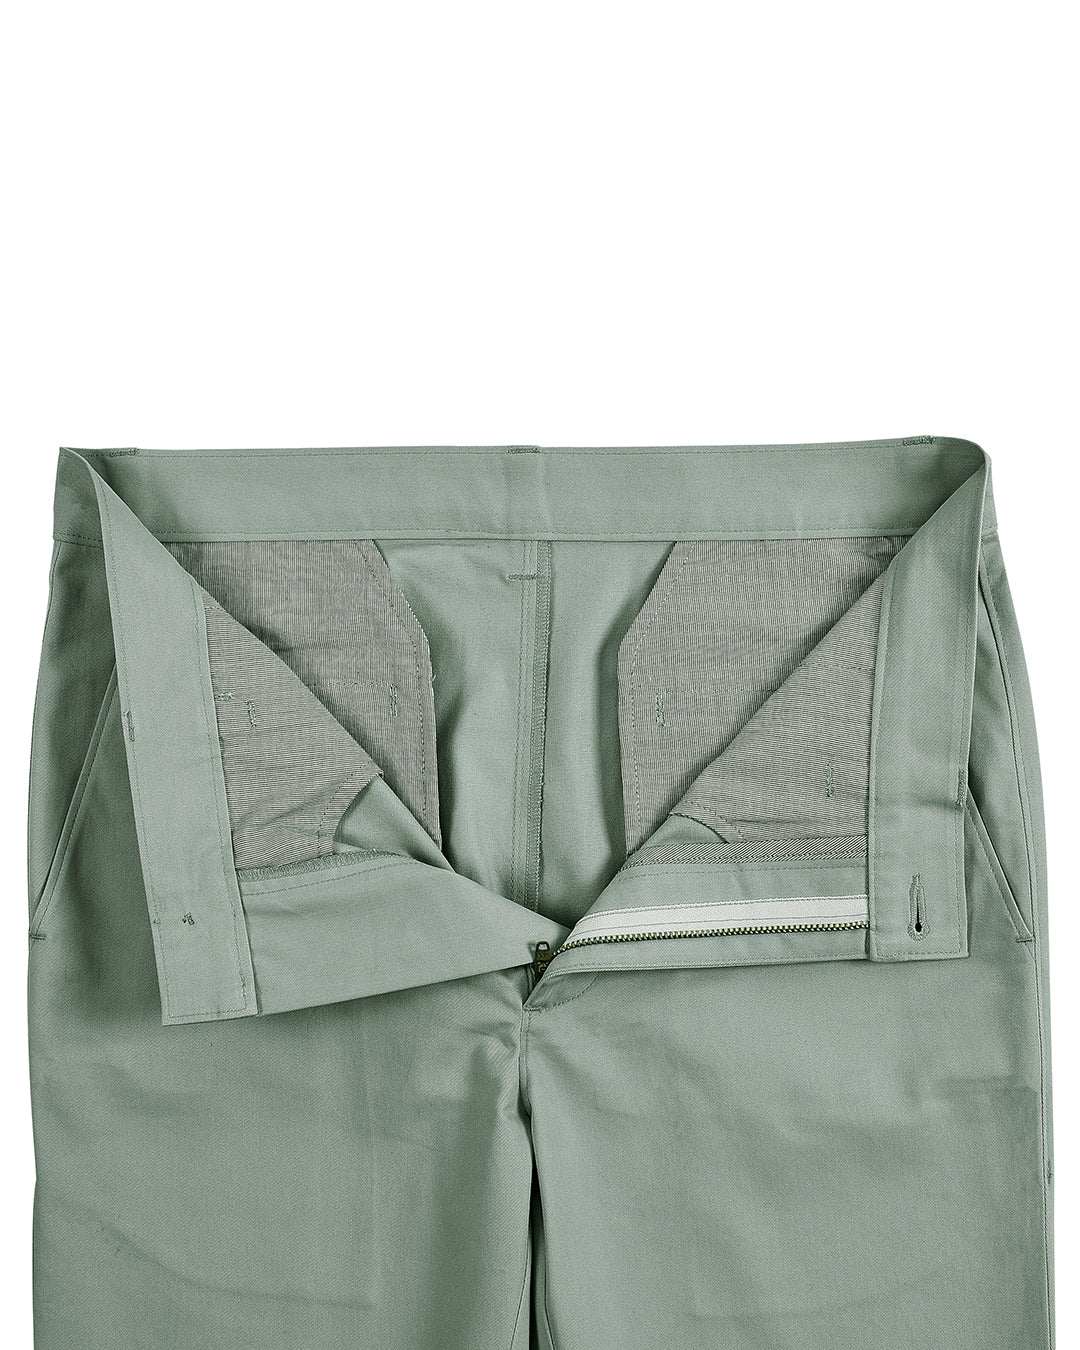 Open front view of custom Genoa Chino pants for men by Luxire in pistachio green